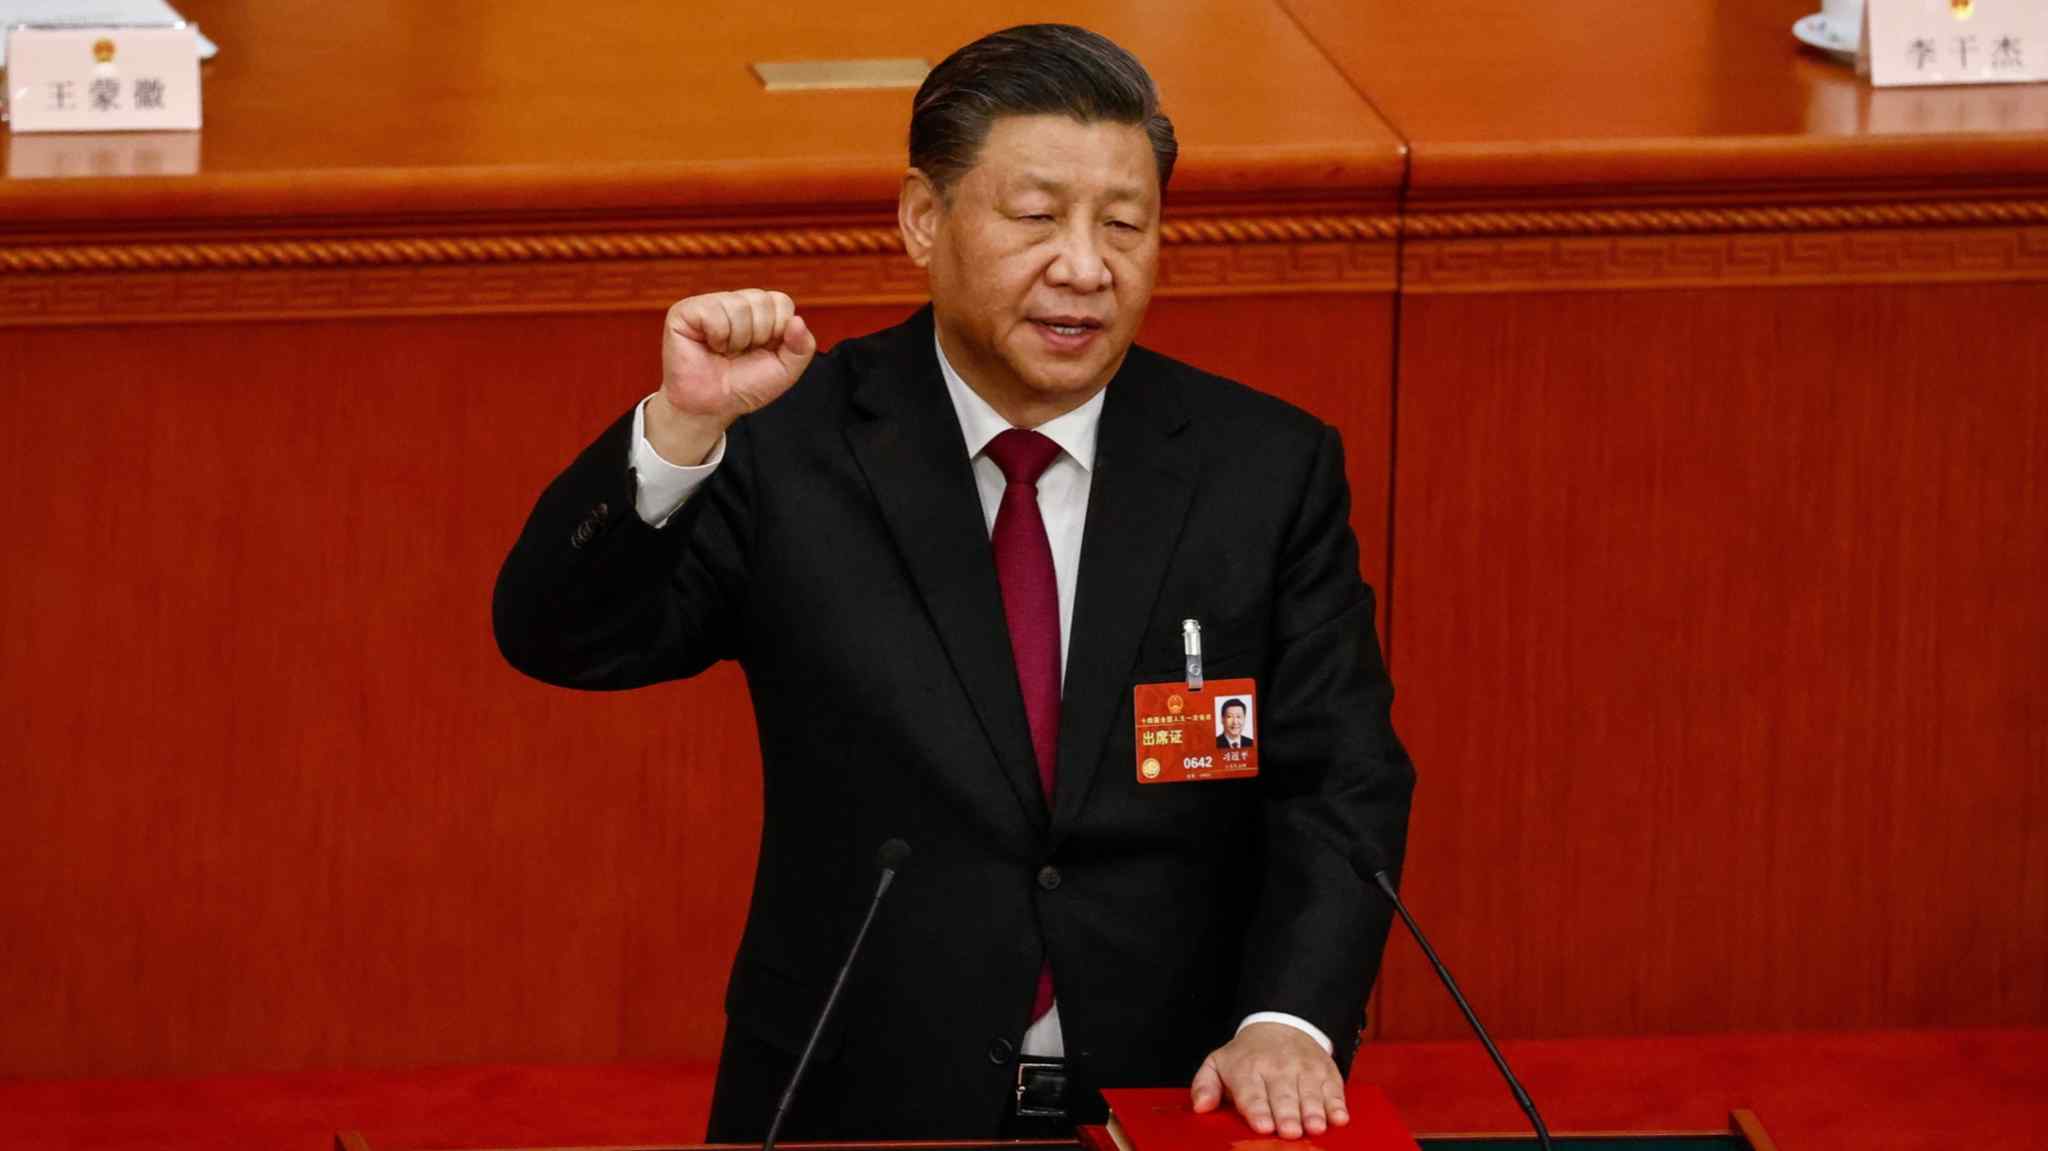 ‘Dare to fight’: Xi unveils China’s new world order